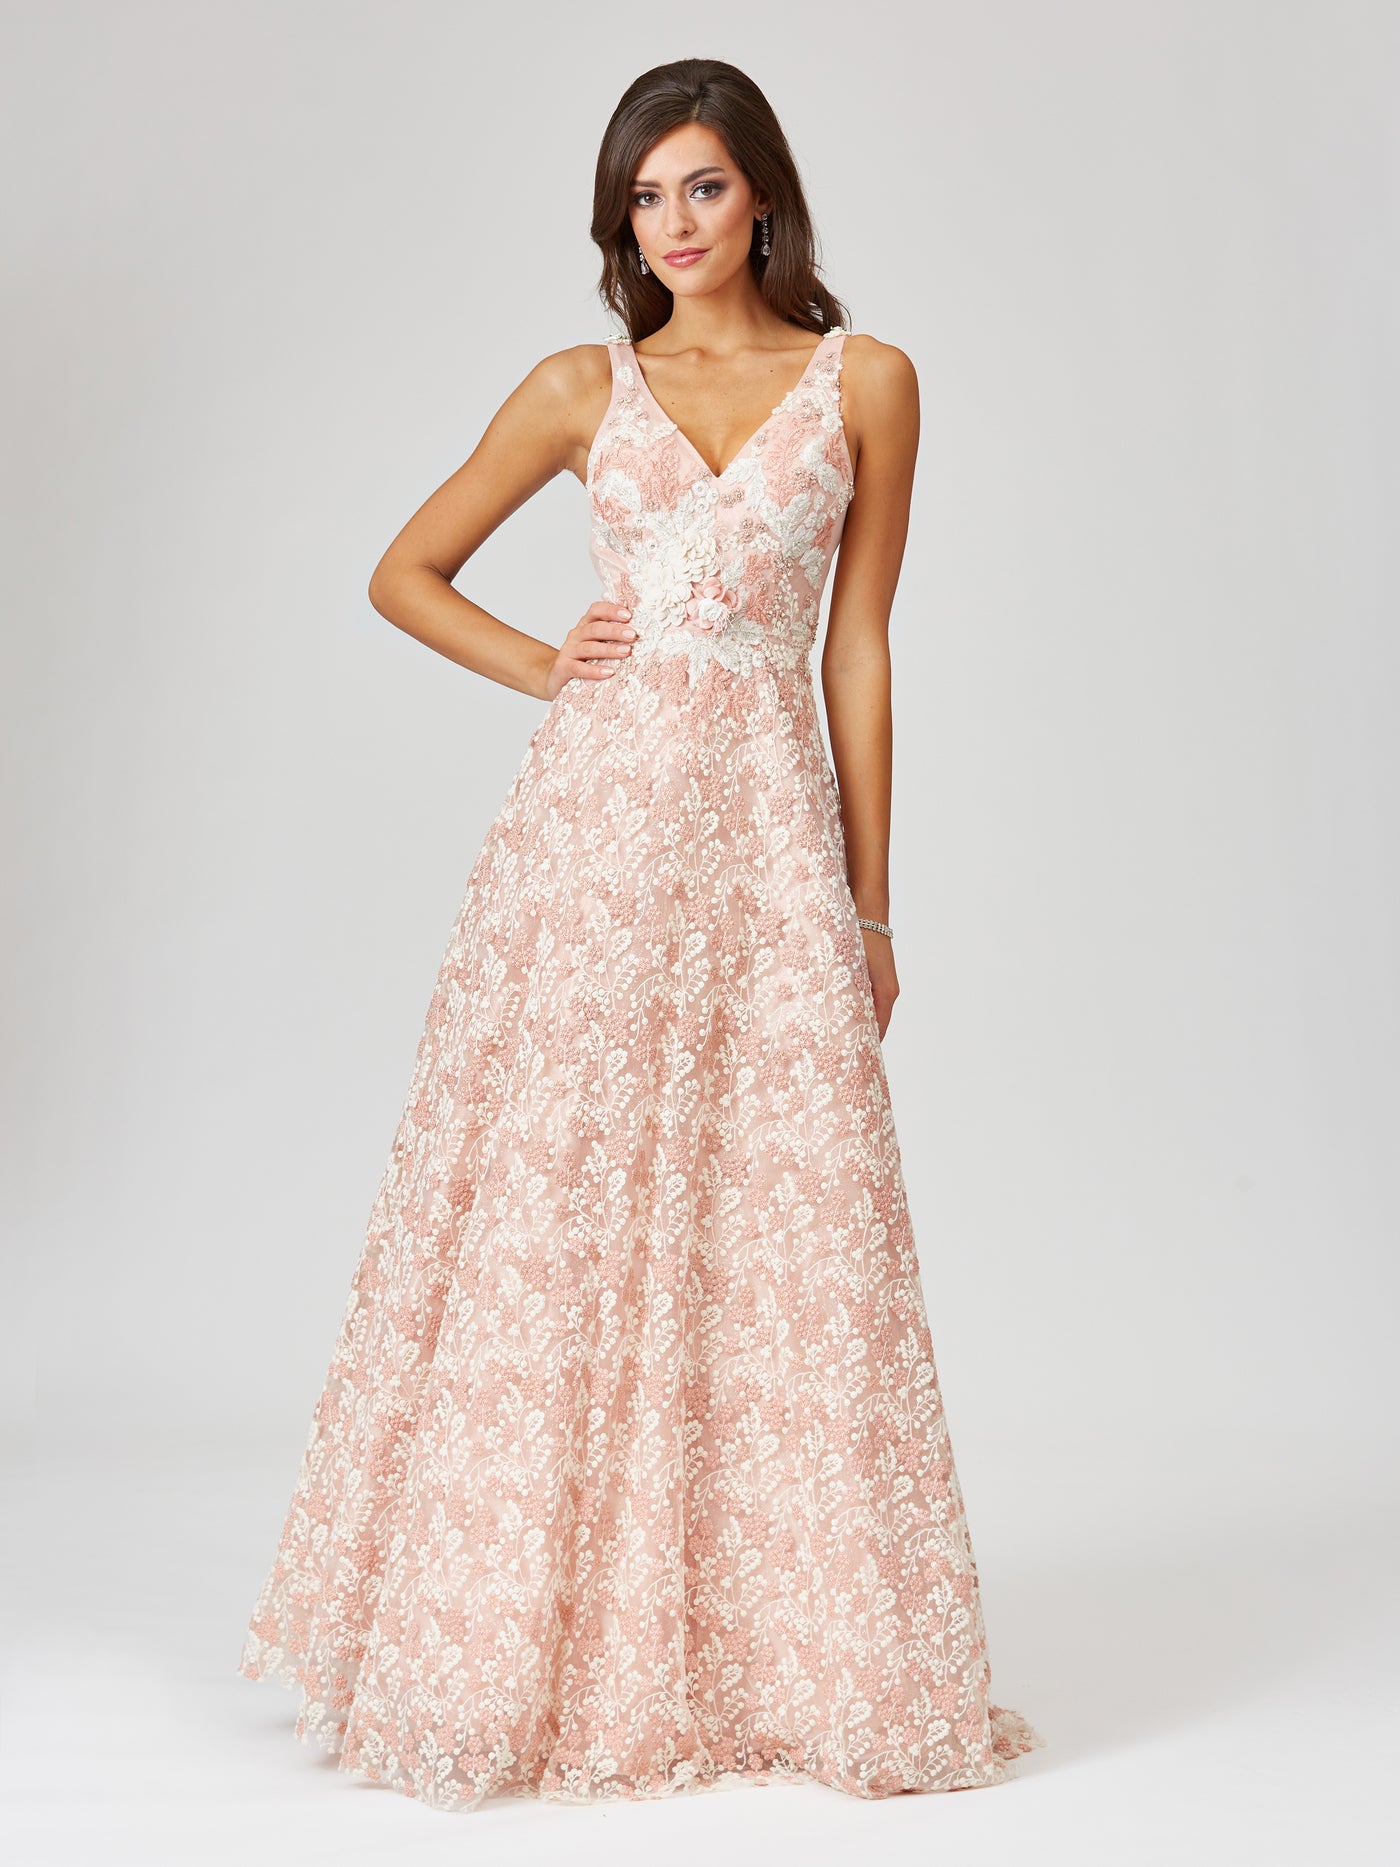 Lara 29463 - Lace Ballgown with Floral Appliques